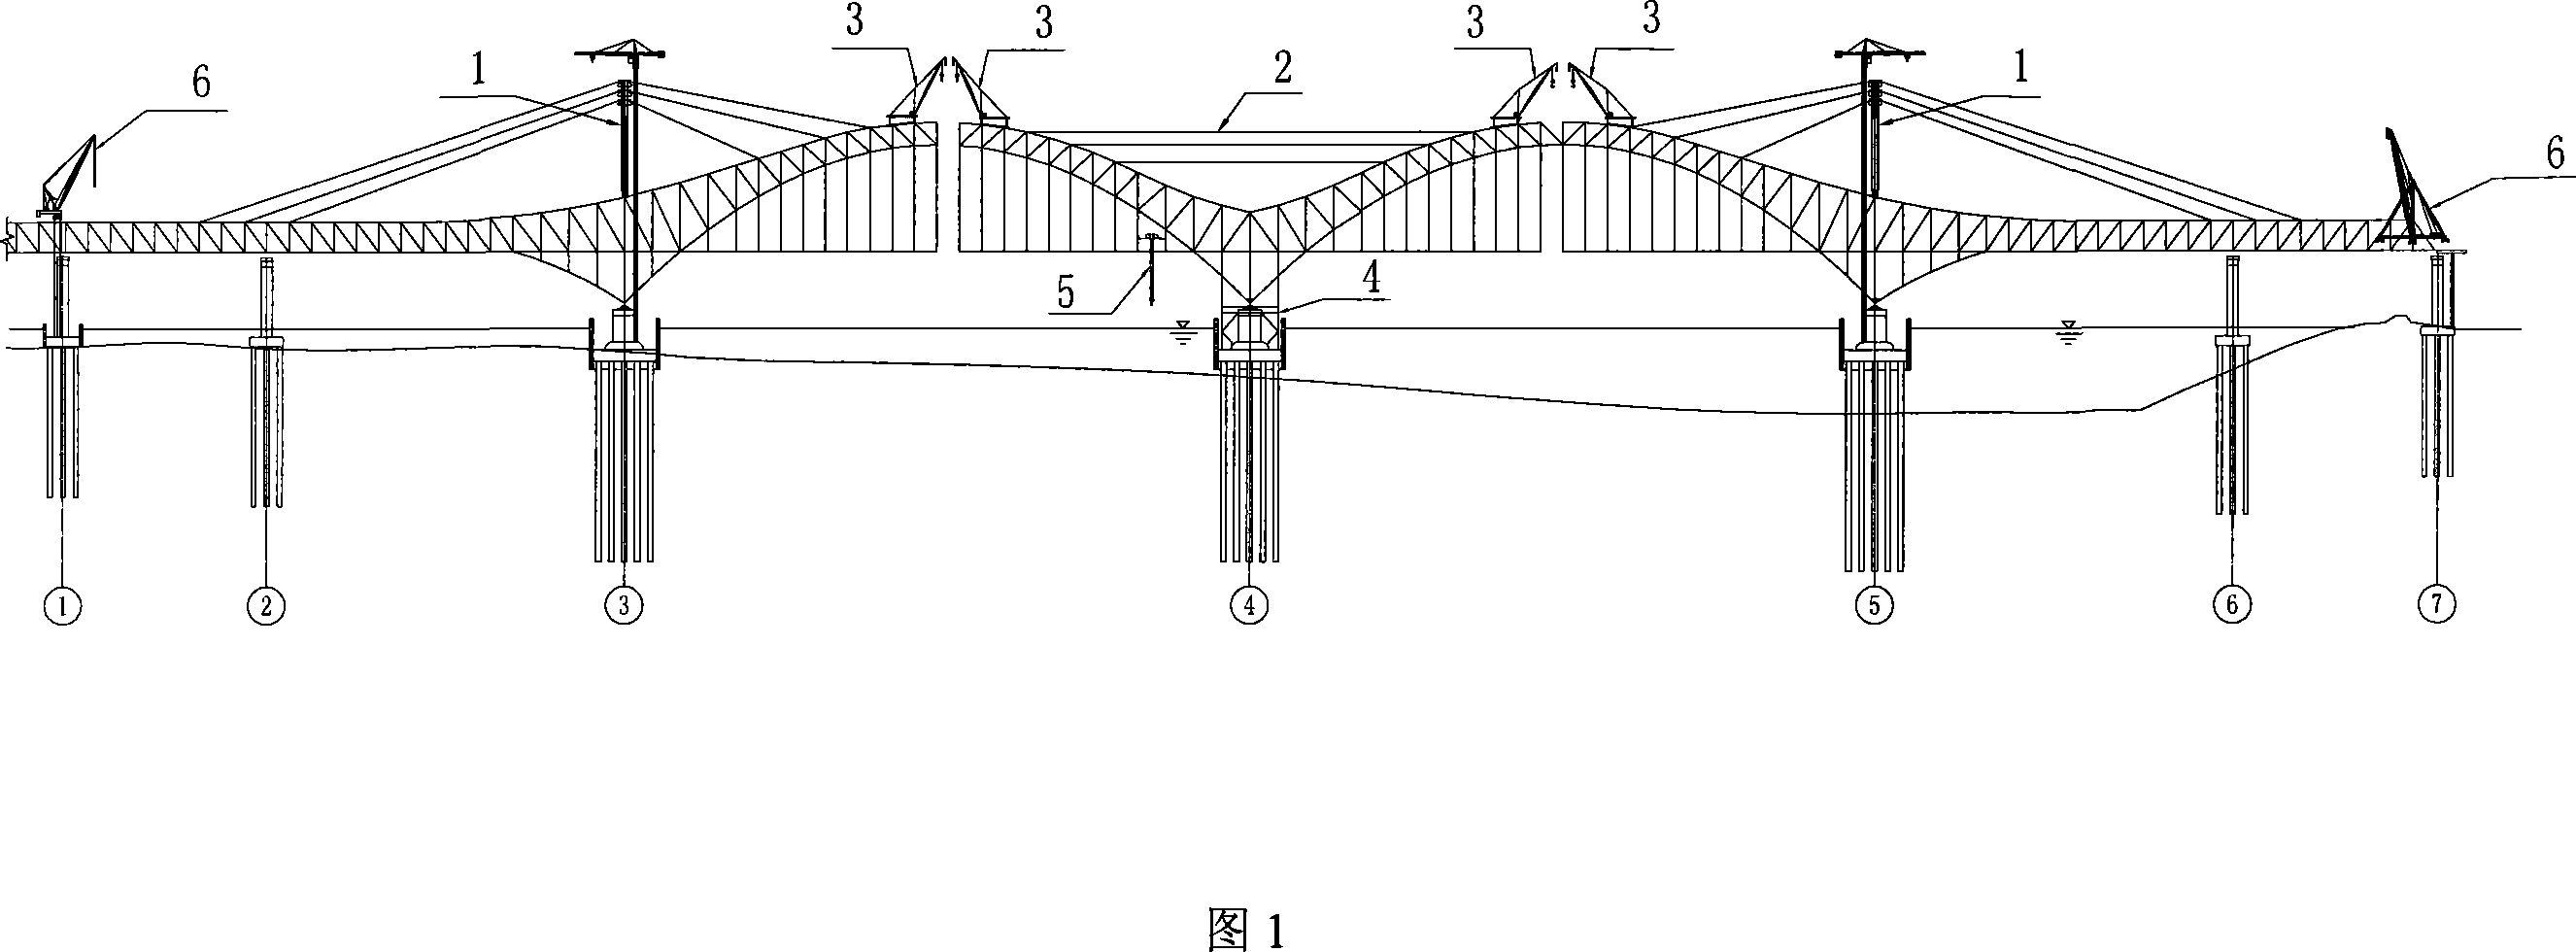 Closure method of large-span continuous steel truss arch